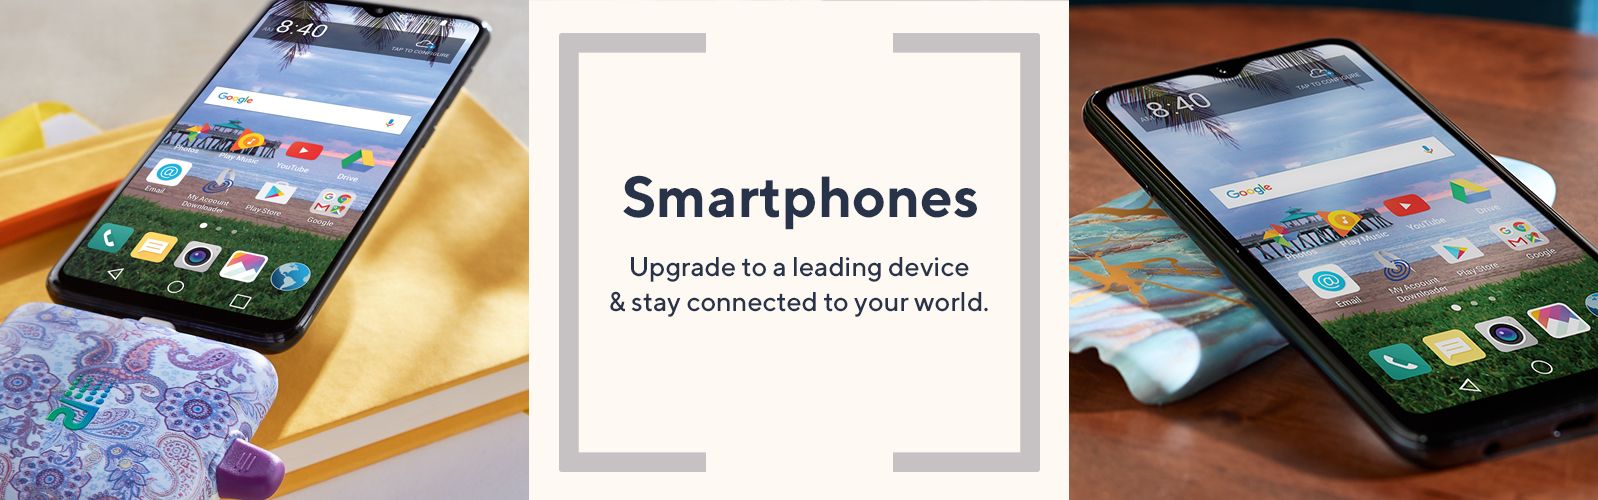 Smartphones.  Upgrade to a leading device & stay connected to your world.